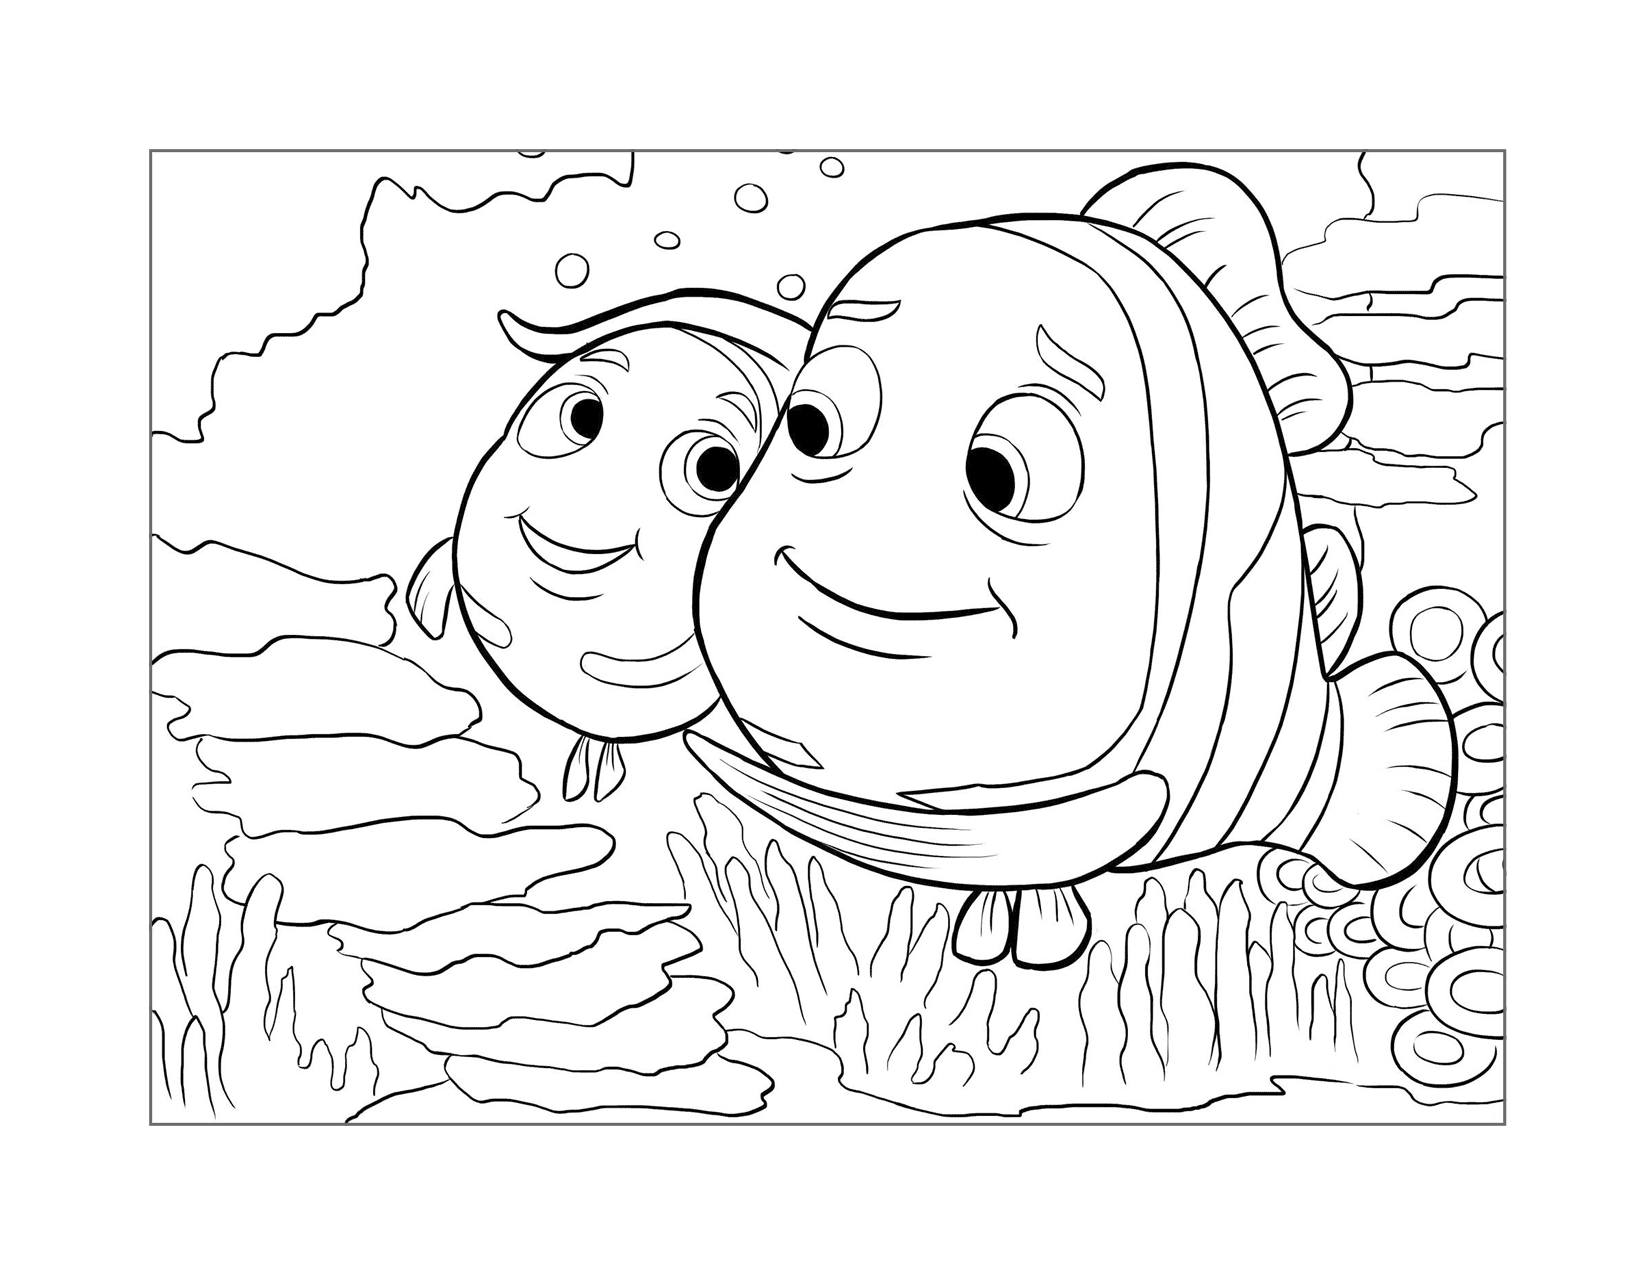 Marlin And Nemo Coloring Page